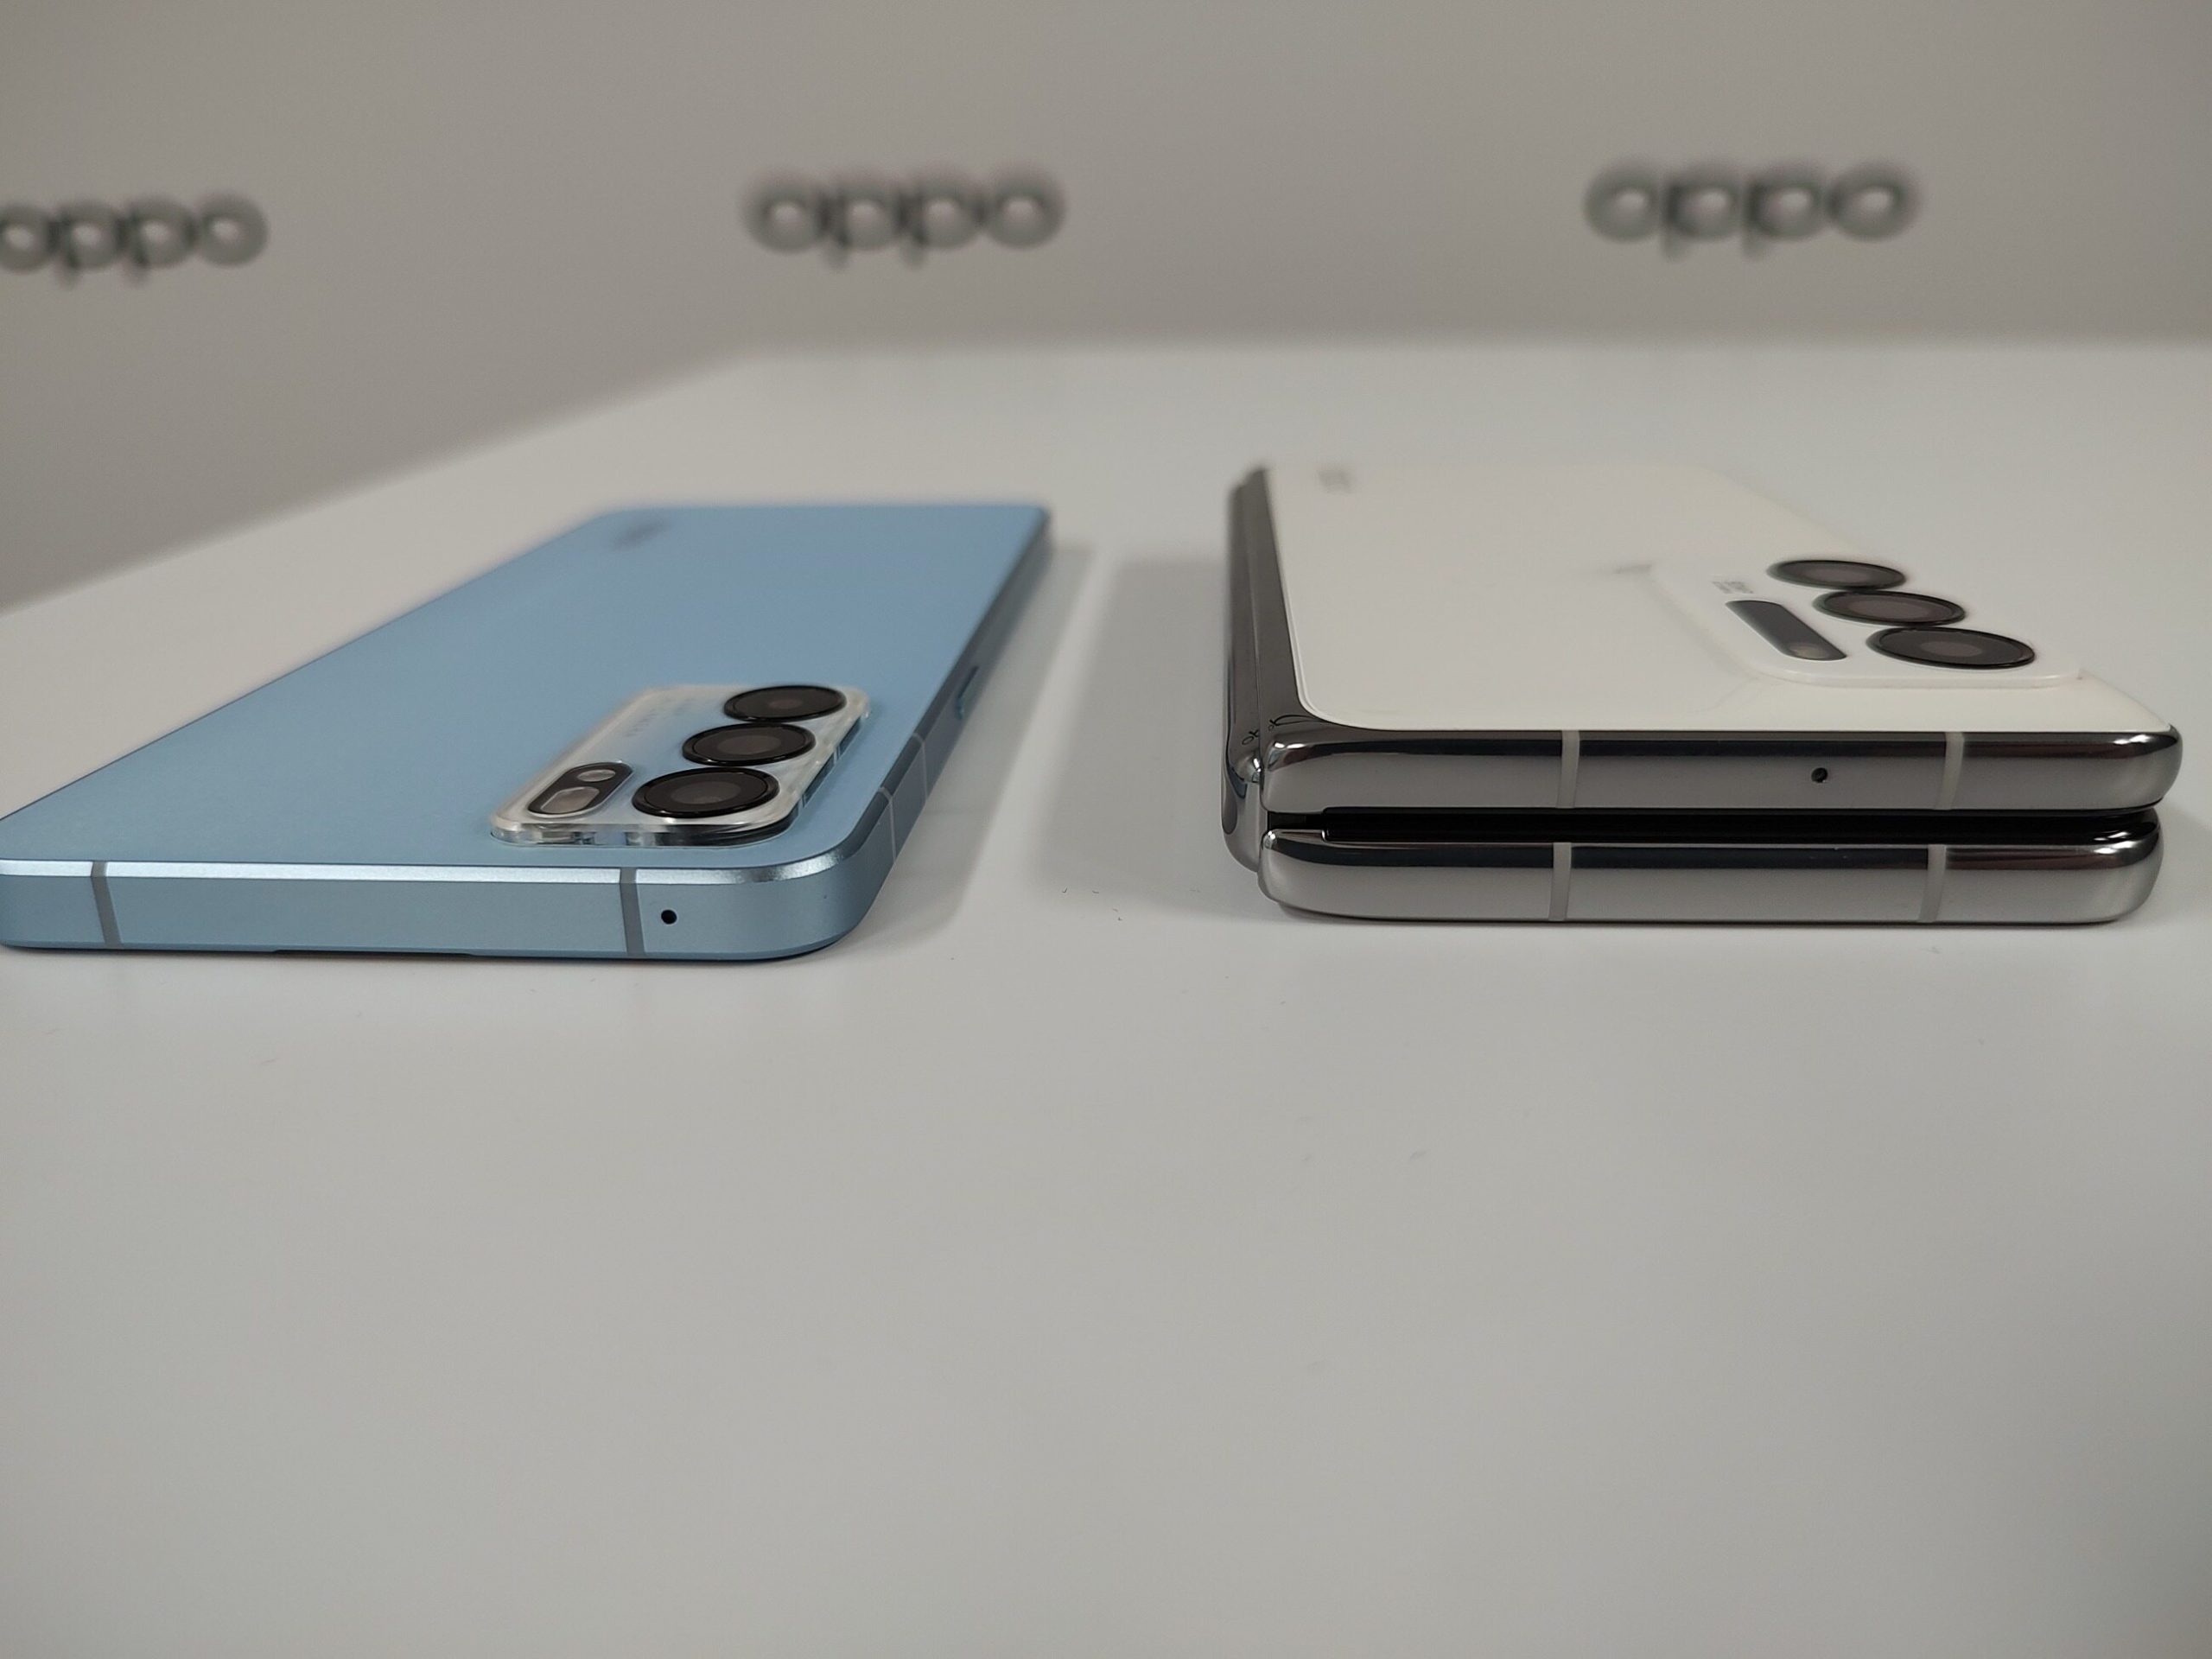 New Oppo smartphone coming soon.  We know what it will offer and how much it will cost